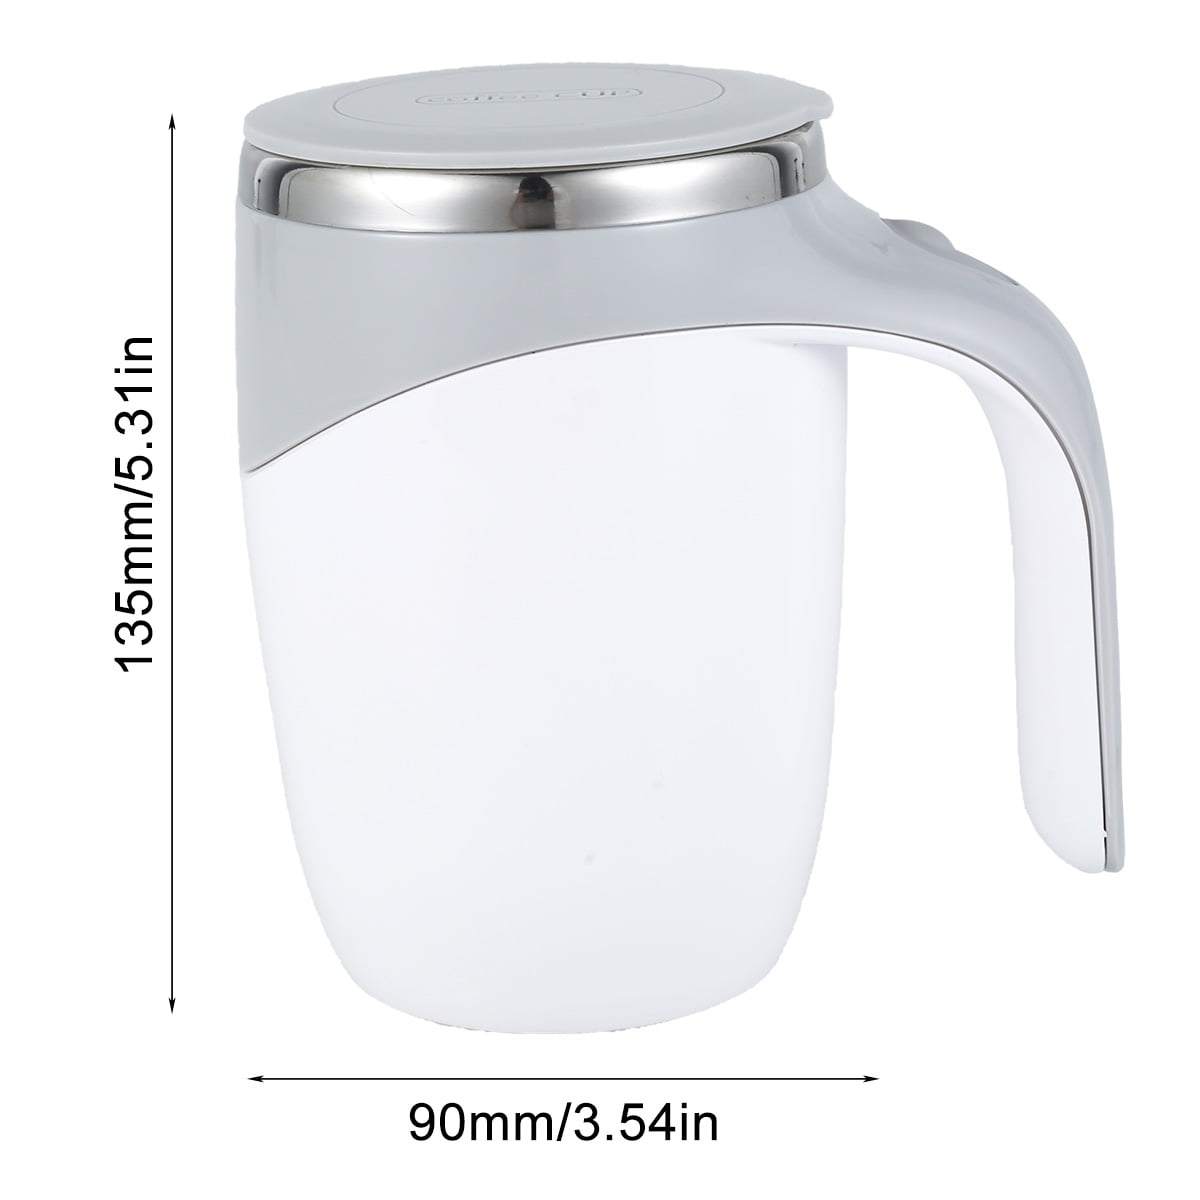 Automatic Mixing Cup – The Modest Home